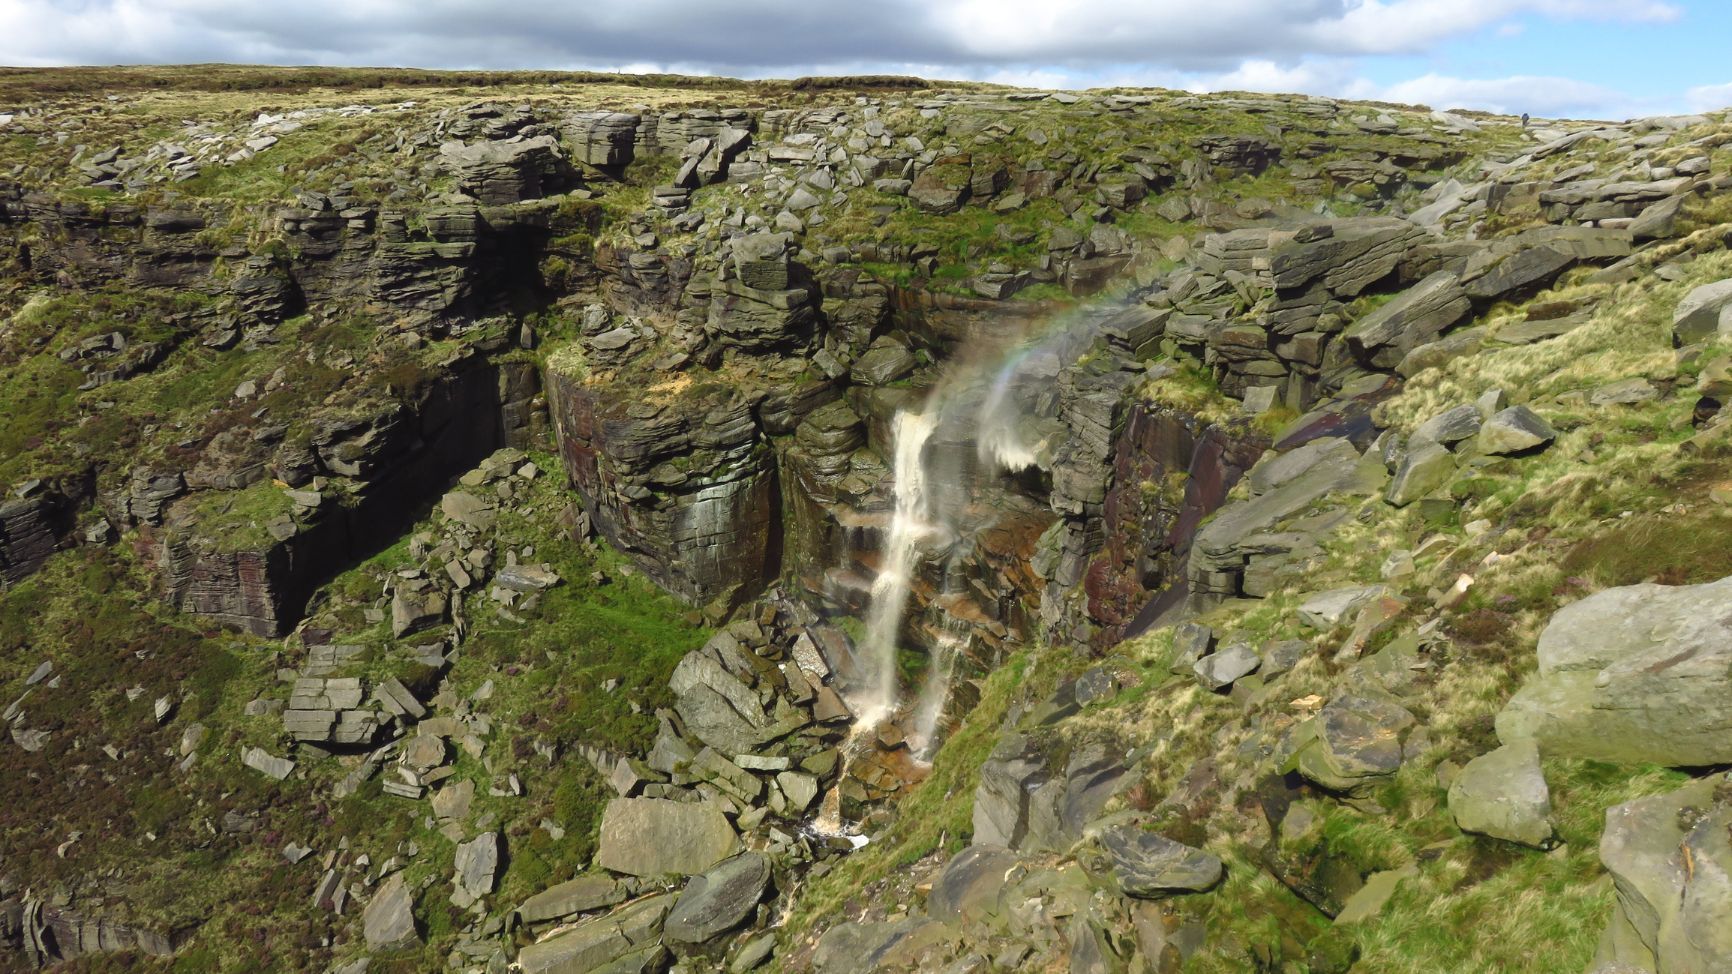 Kinder Downfall in Peak District National Park, a waterfall falling off Kinder Scout plateau